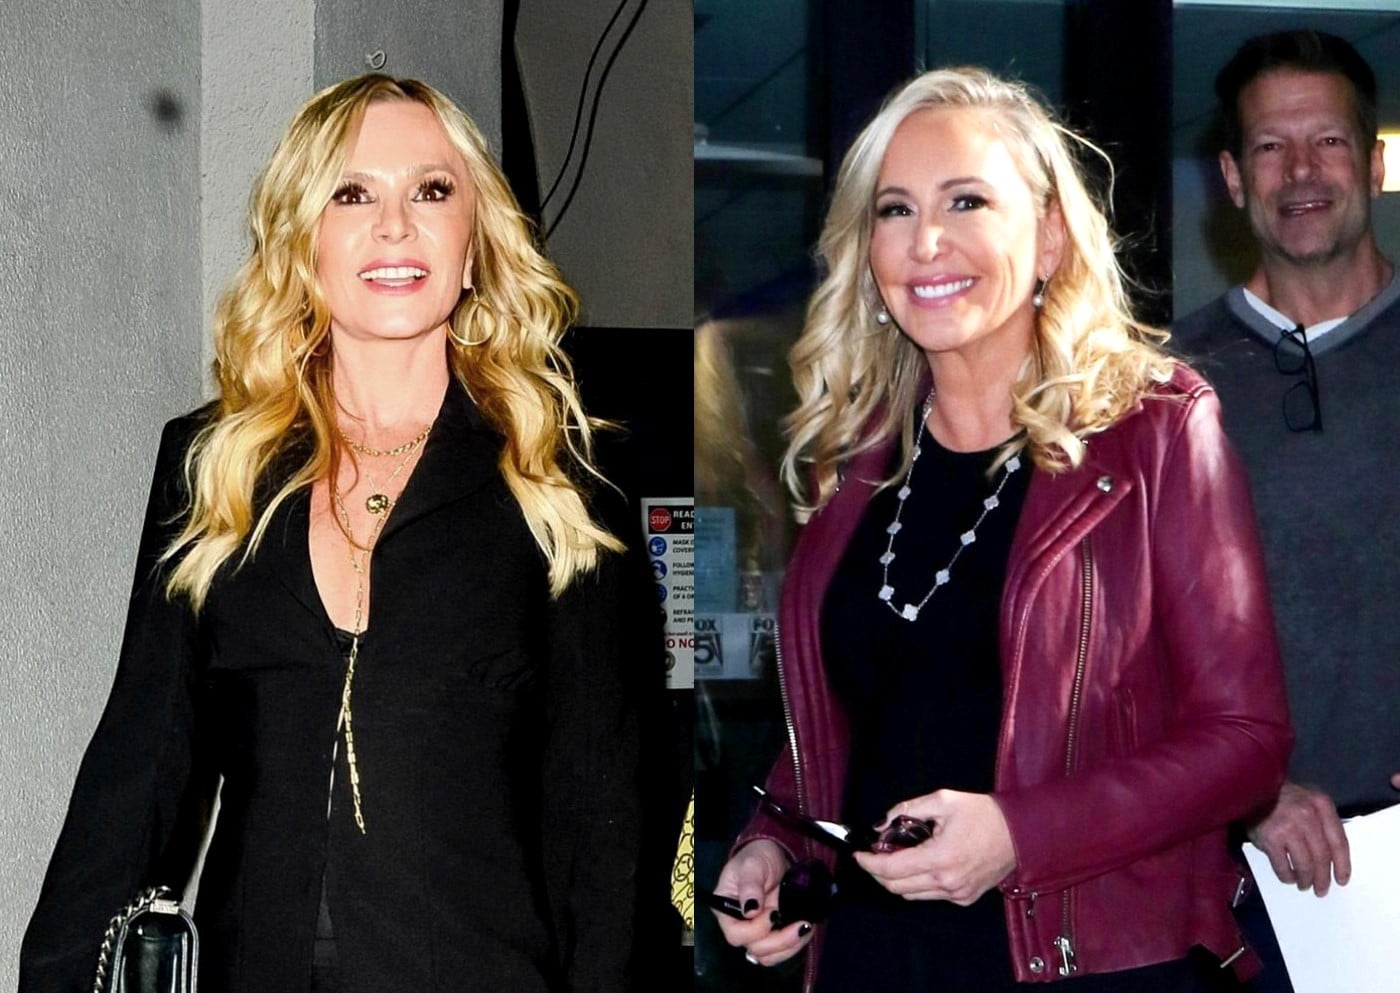 RHOC Alum Tamra Judge Accused of Body Shaming Shannon Beador and Shading Her Drinking as Fans Slam Her Comments as "Classless" and "Disgusting"